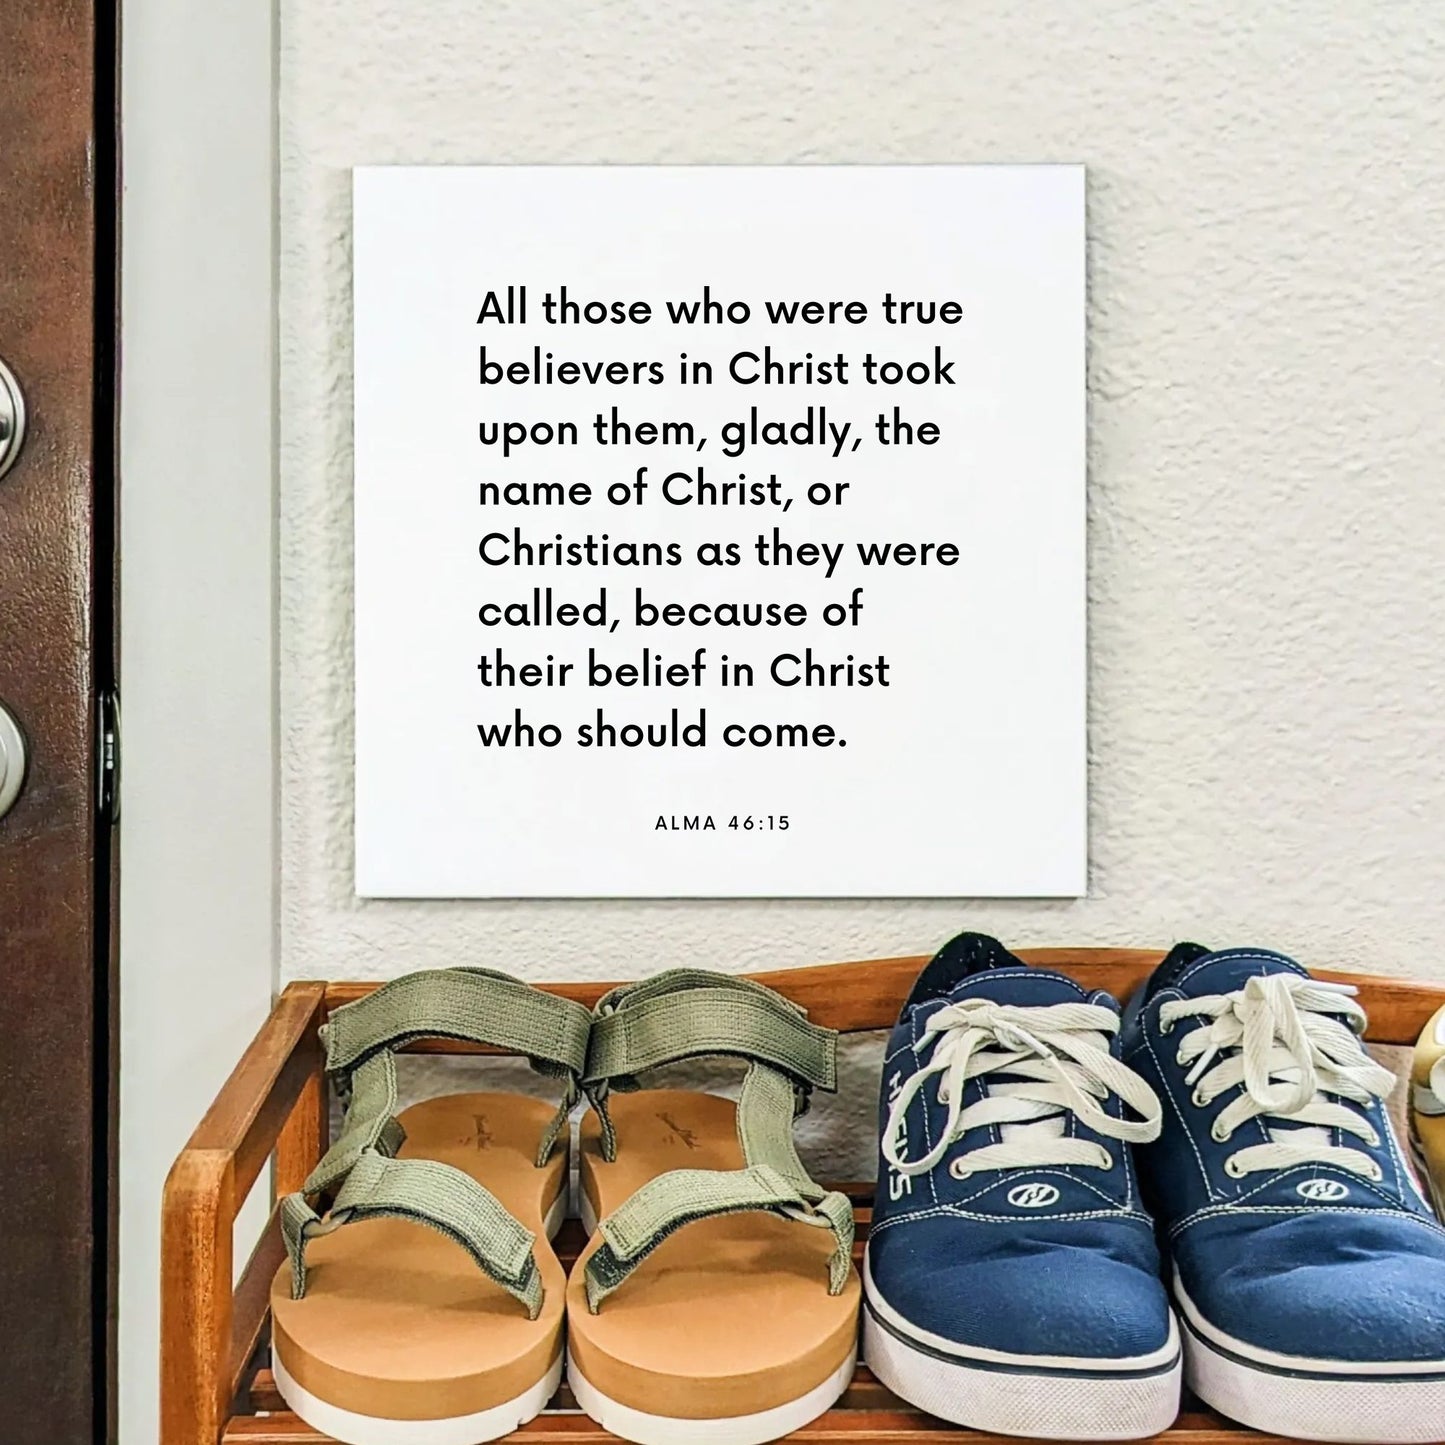 Shoes mouting of the scripture tile for Alma 46:15 - "All those who were true believers in Christ"